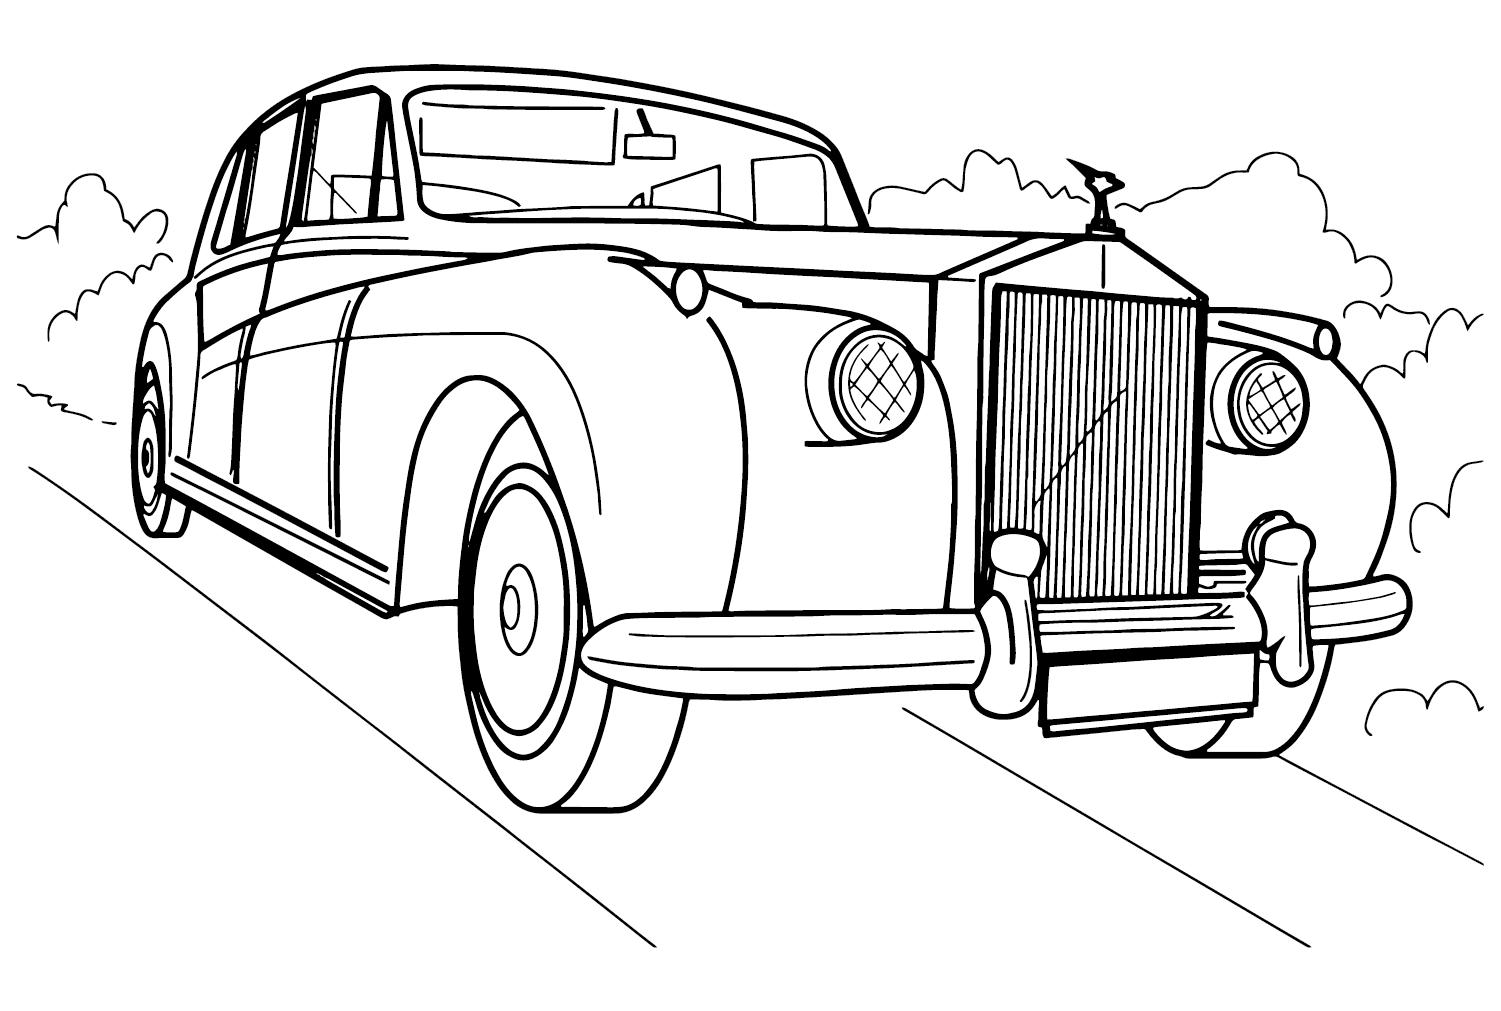 Rolls Royce Phantom V Coloring Page from Rolls Royce